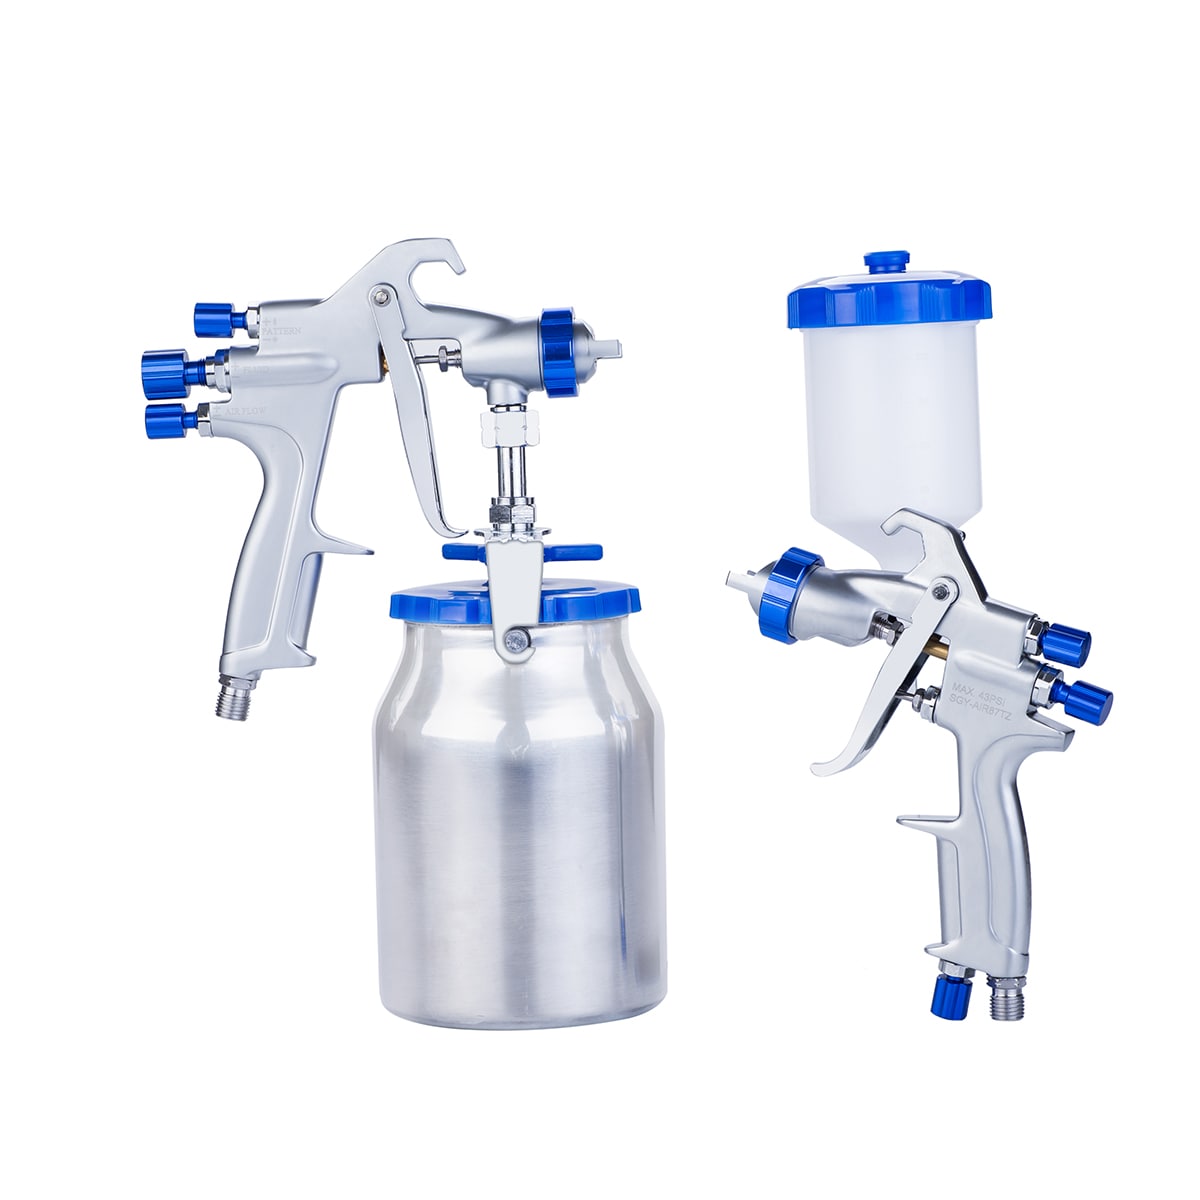 Complete Pneumatic Airbrush Kit With Hose And Compressor Spray Gun